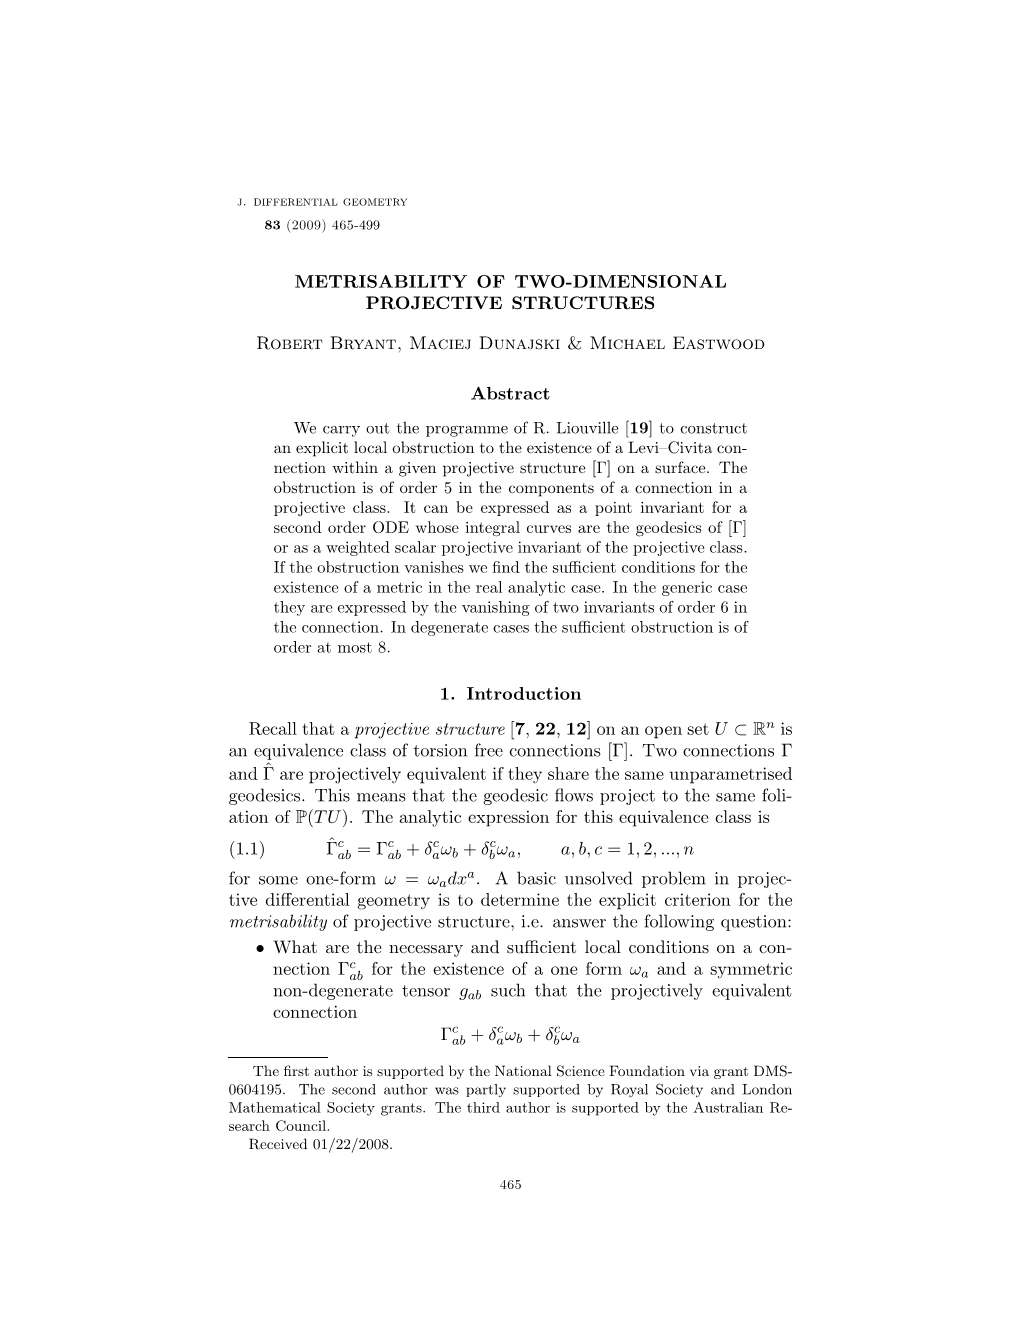 Metrisability of Two-Dimensional Projective Structures